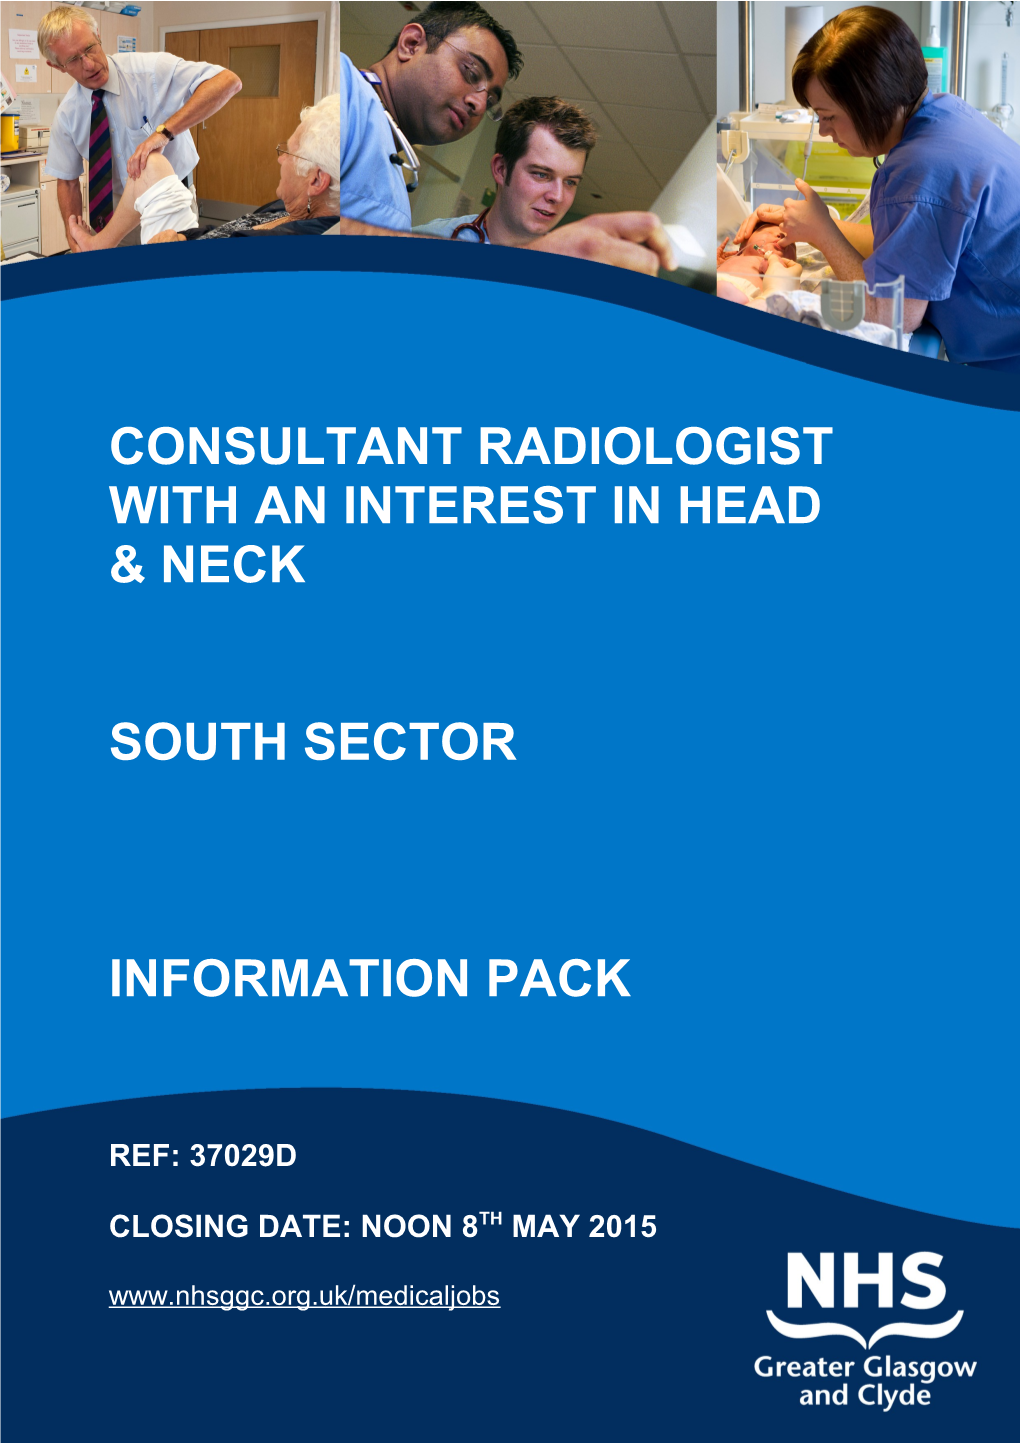 Consultant Radiologist with an Interest in Head & Neck